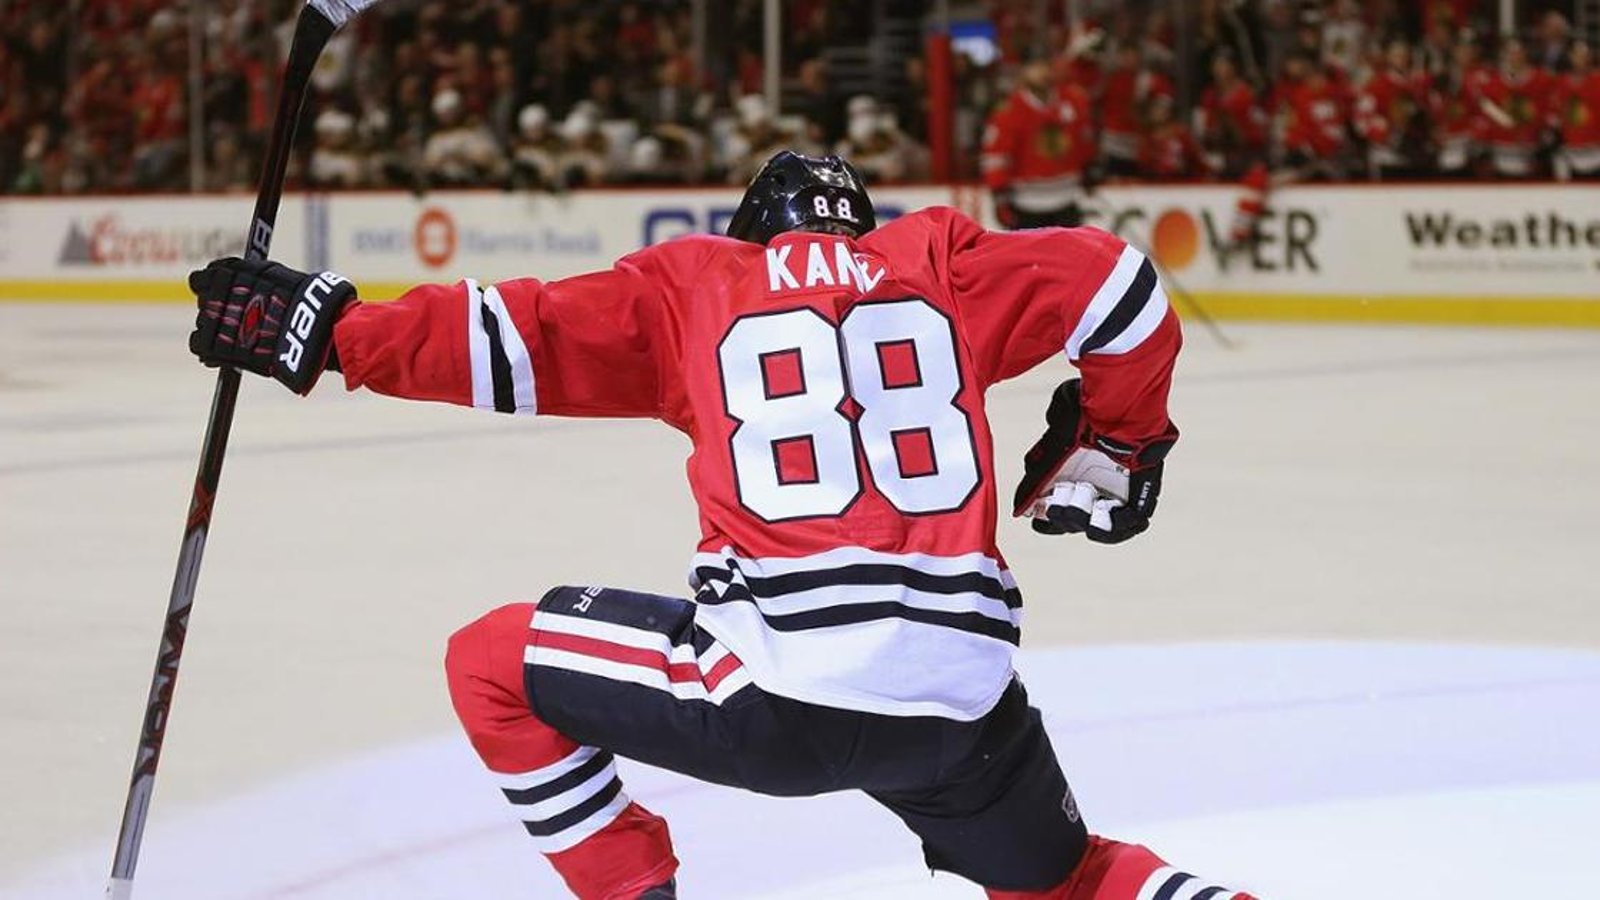 Must See: Patrick Kane has just recorded his 800th NHL point!